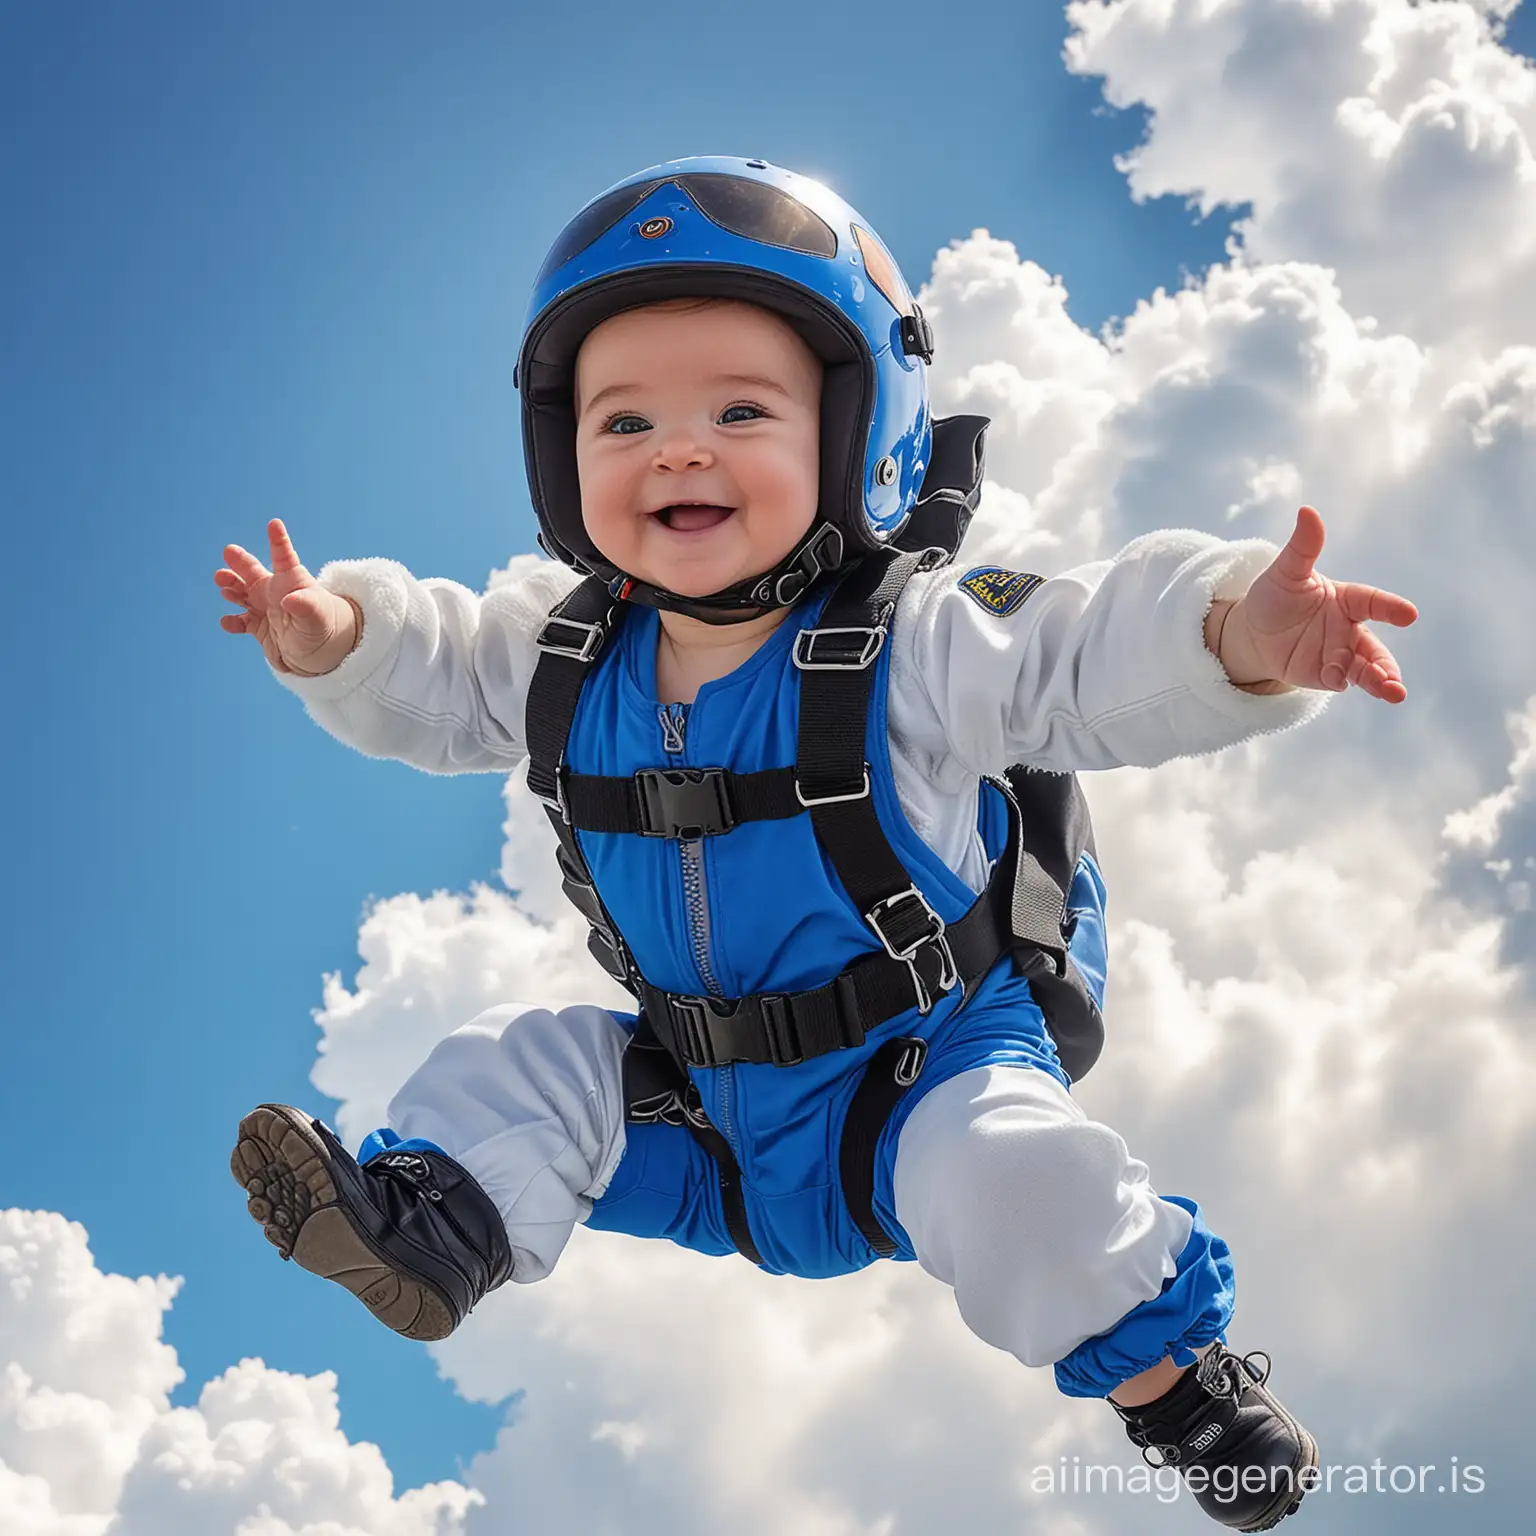 A baby skydiving in the sky. The baby should be wearing a small skydiving suit with a helmet and goggles. The sky should have fluffy white clouds and a bright blue background. The baby should have a joyful expression on their face, with their arms and legs spread out as if they are enjoying the experience. The image should be vibrant and full of energy.